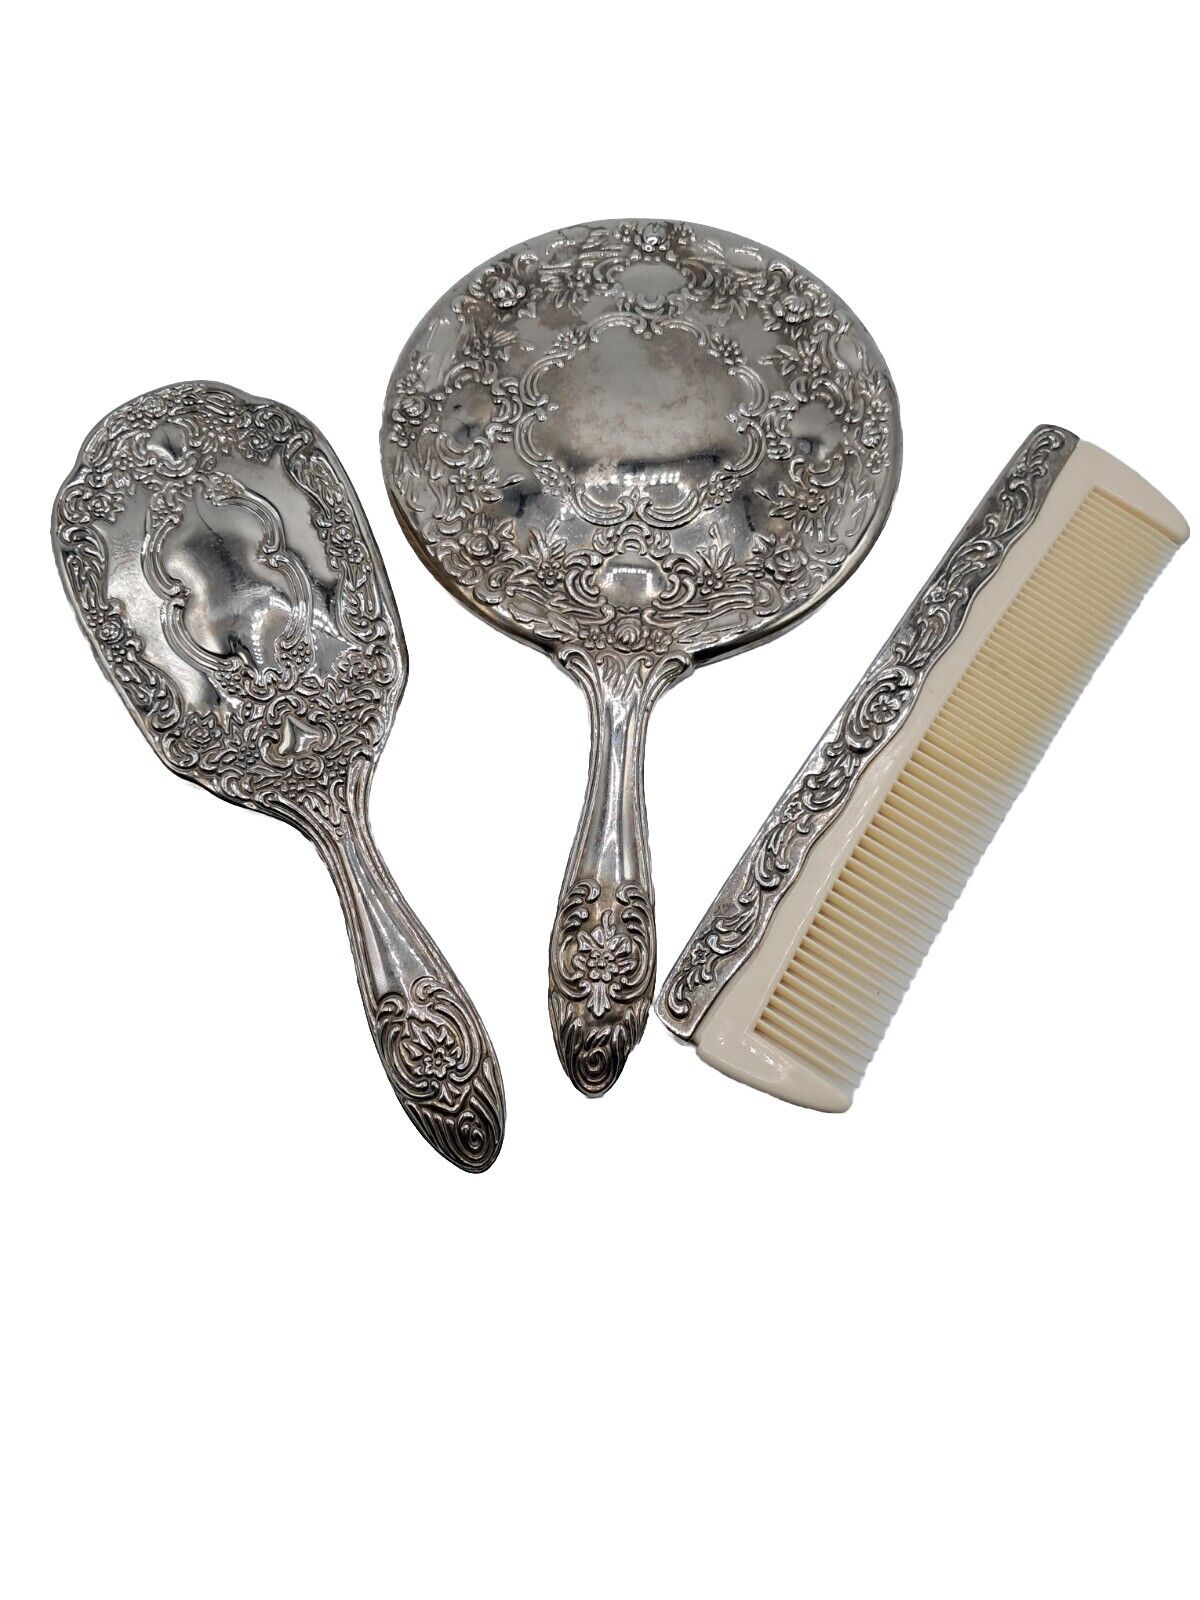 WOW VINTAGE HEAVY SILVER PLATED MIRROR AND BRUSH SET